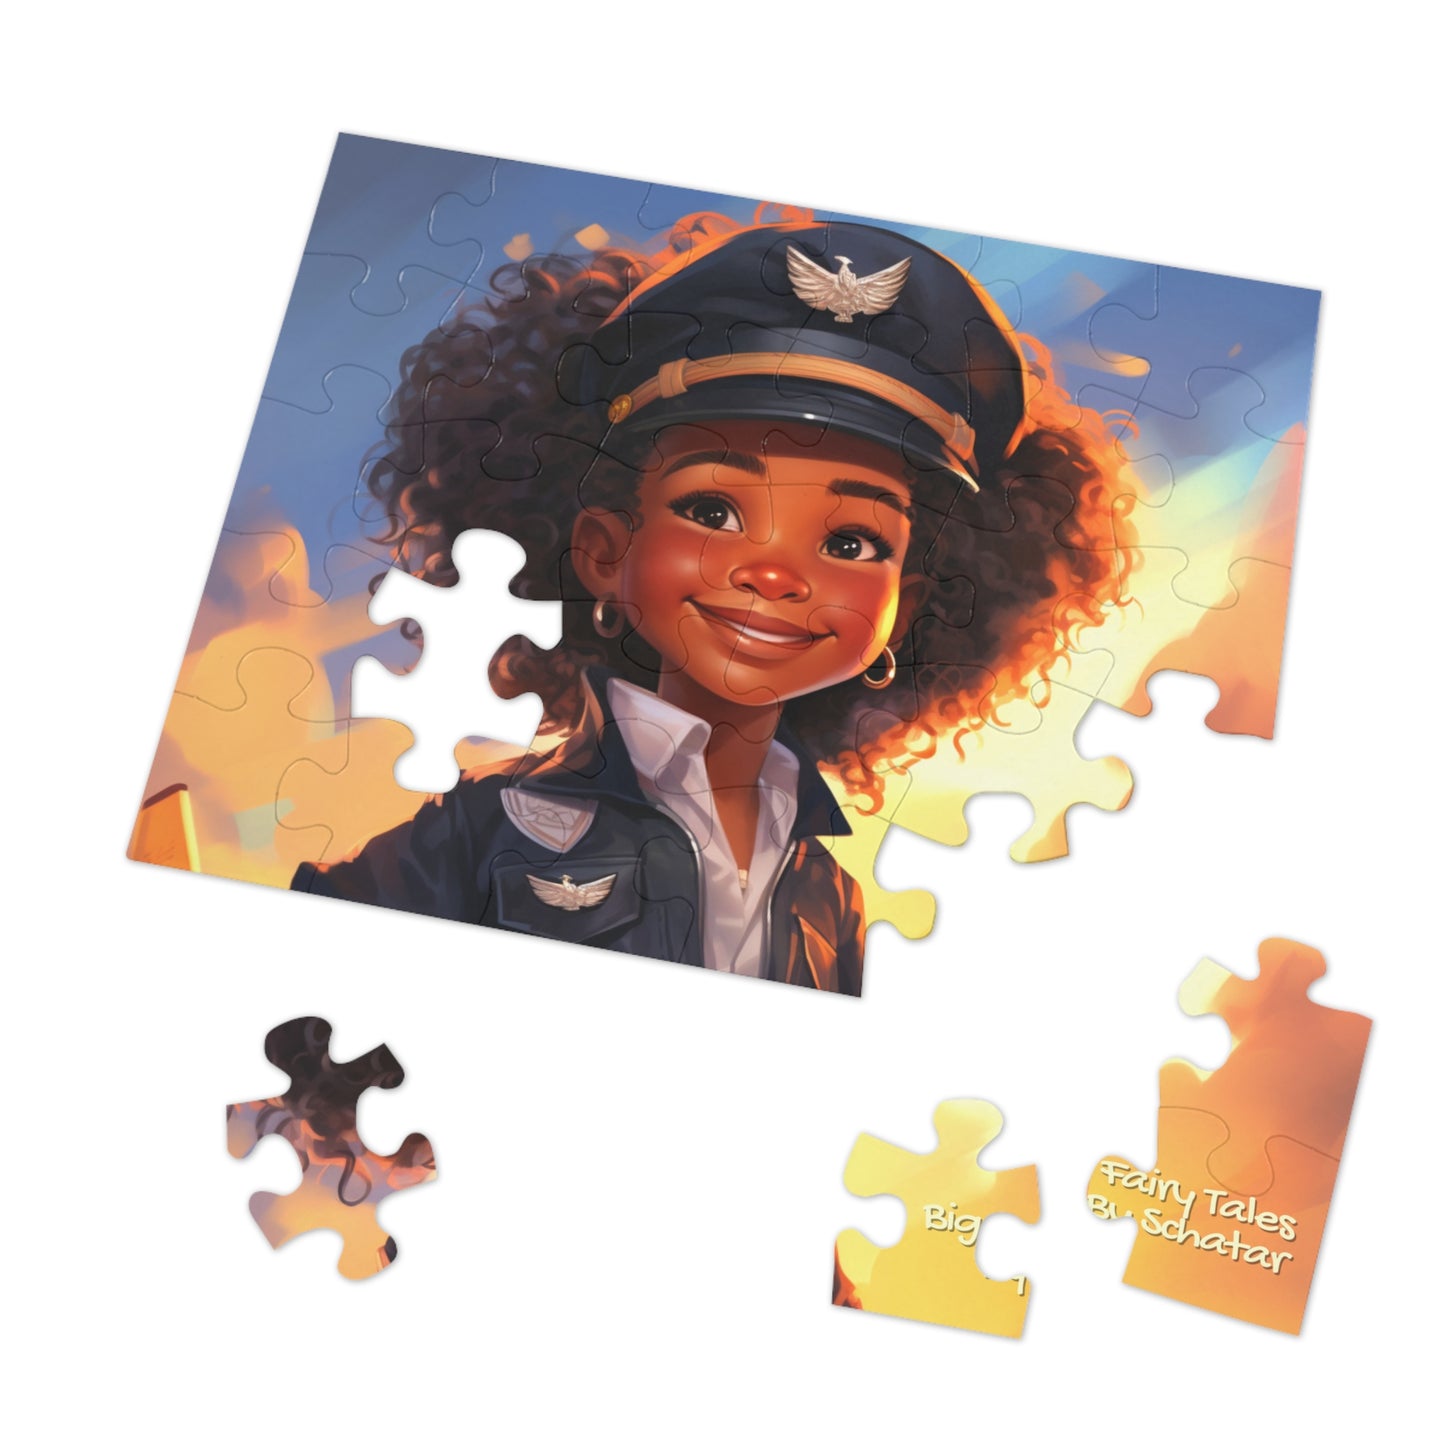 Pilot - Big Little Professionals Puzzle 5 From Big Fairy Tales By Schatar